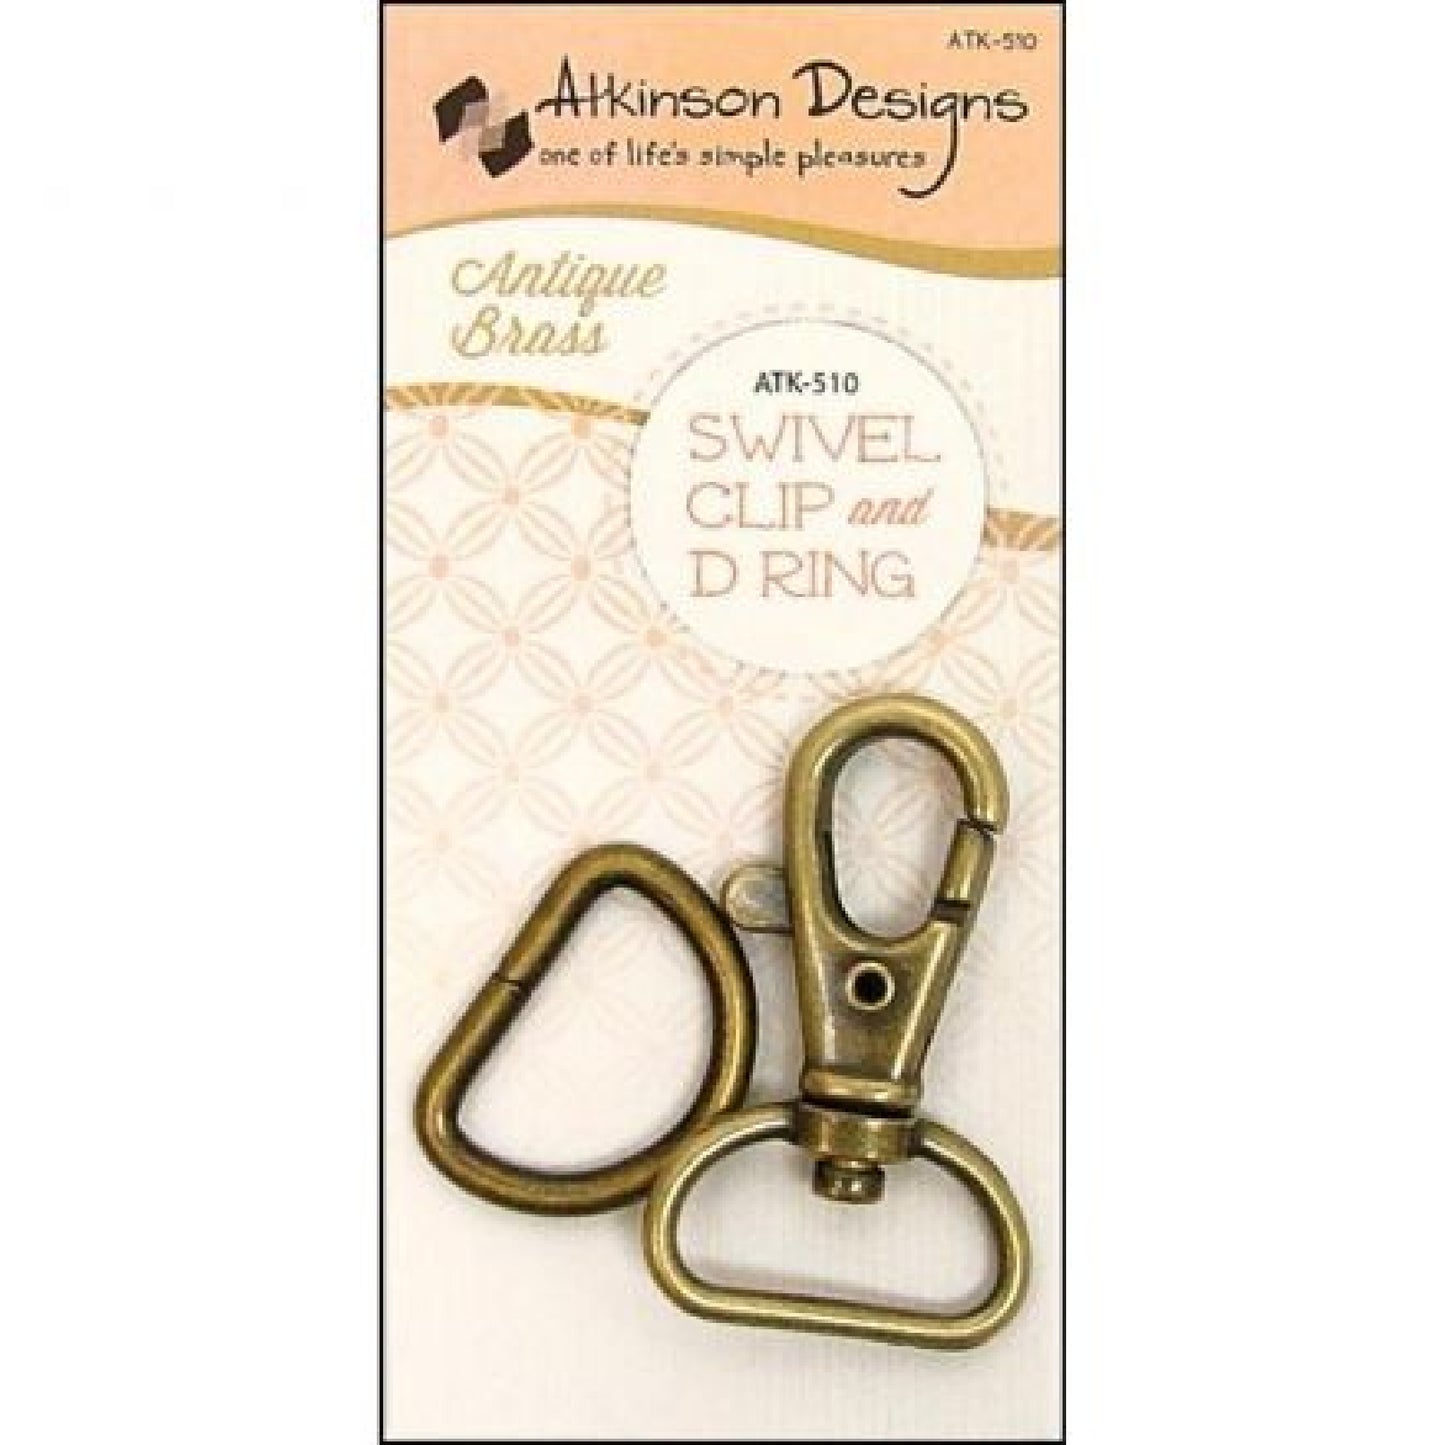 The Swivel Clip & "D" Ring in Antique Brass & Nickel 3/4" - Nonna's Notions N' Sew On